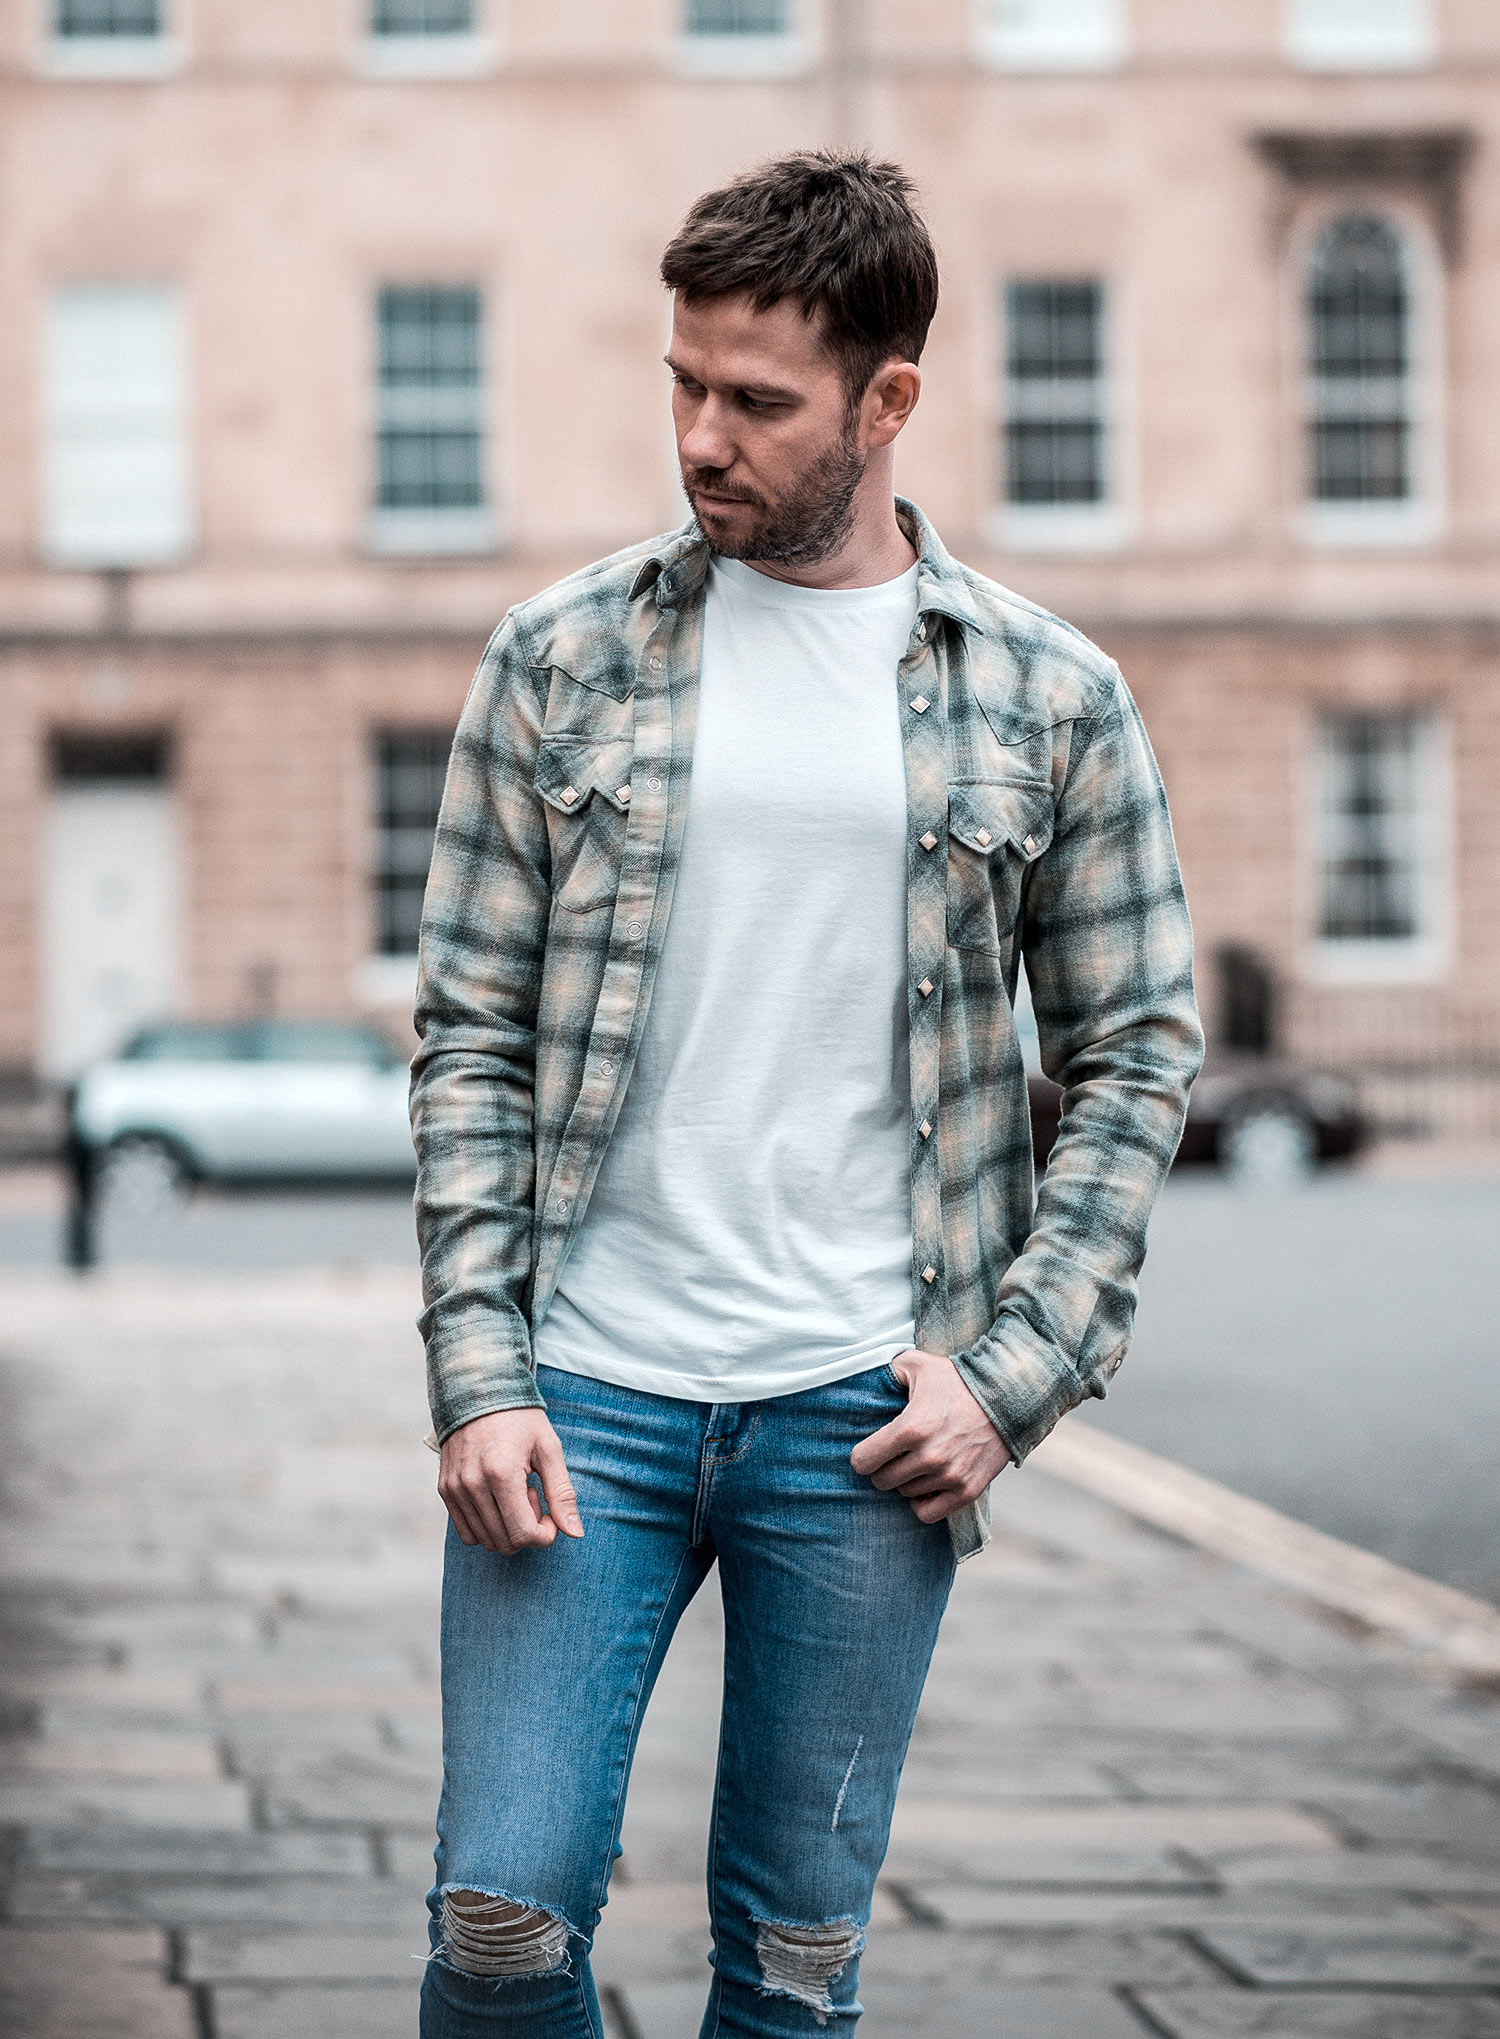 AllSaints Cowboy Check Shirt And Boots Outfit - Your Average Guy